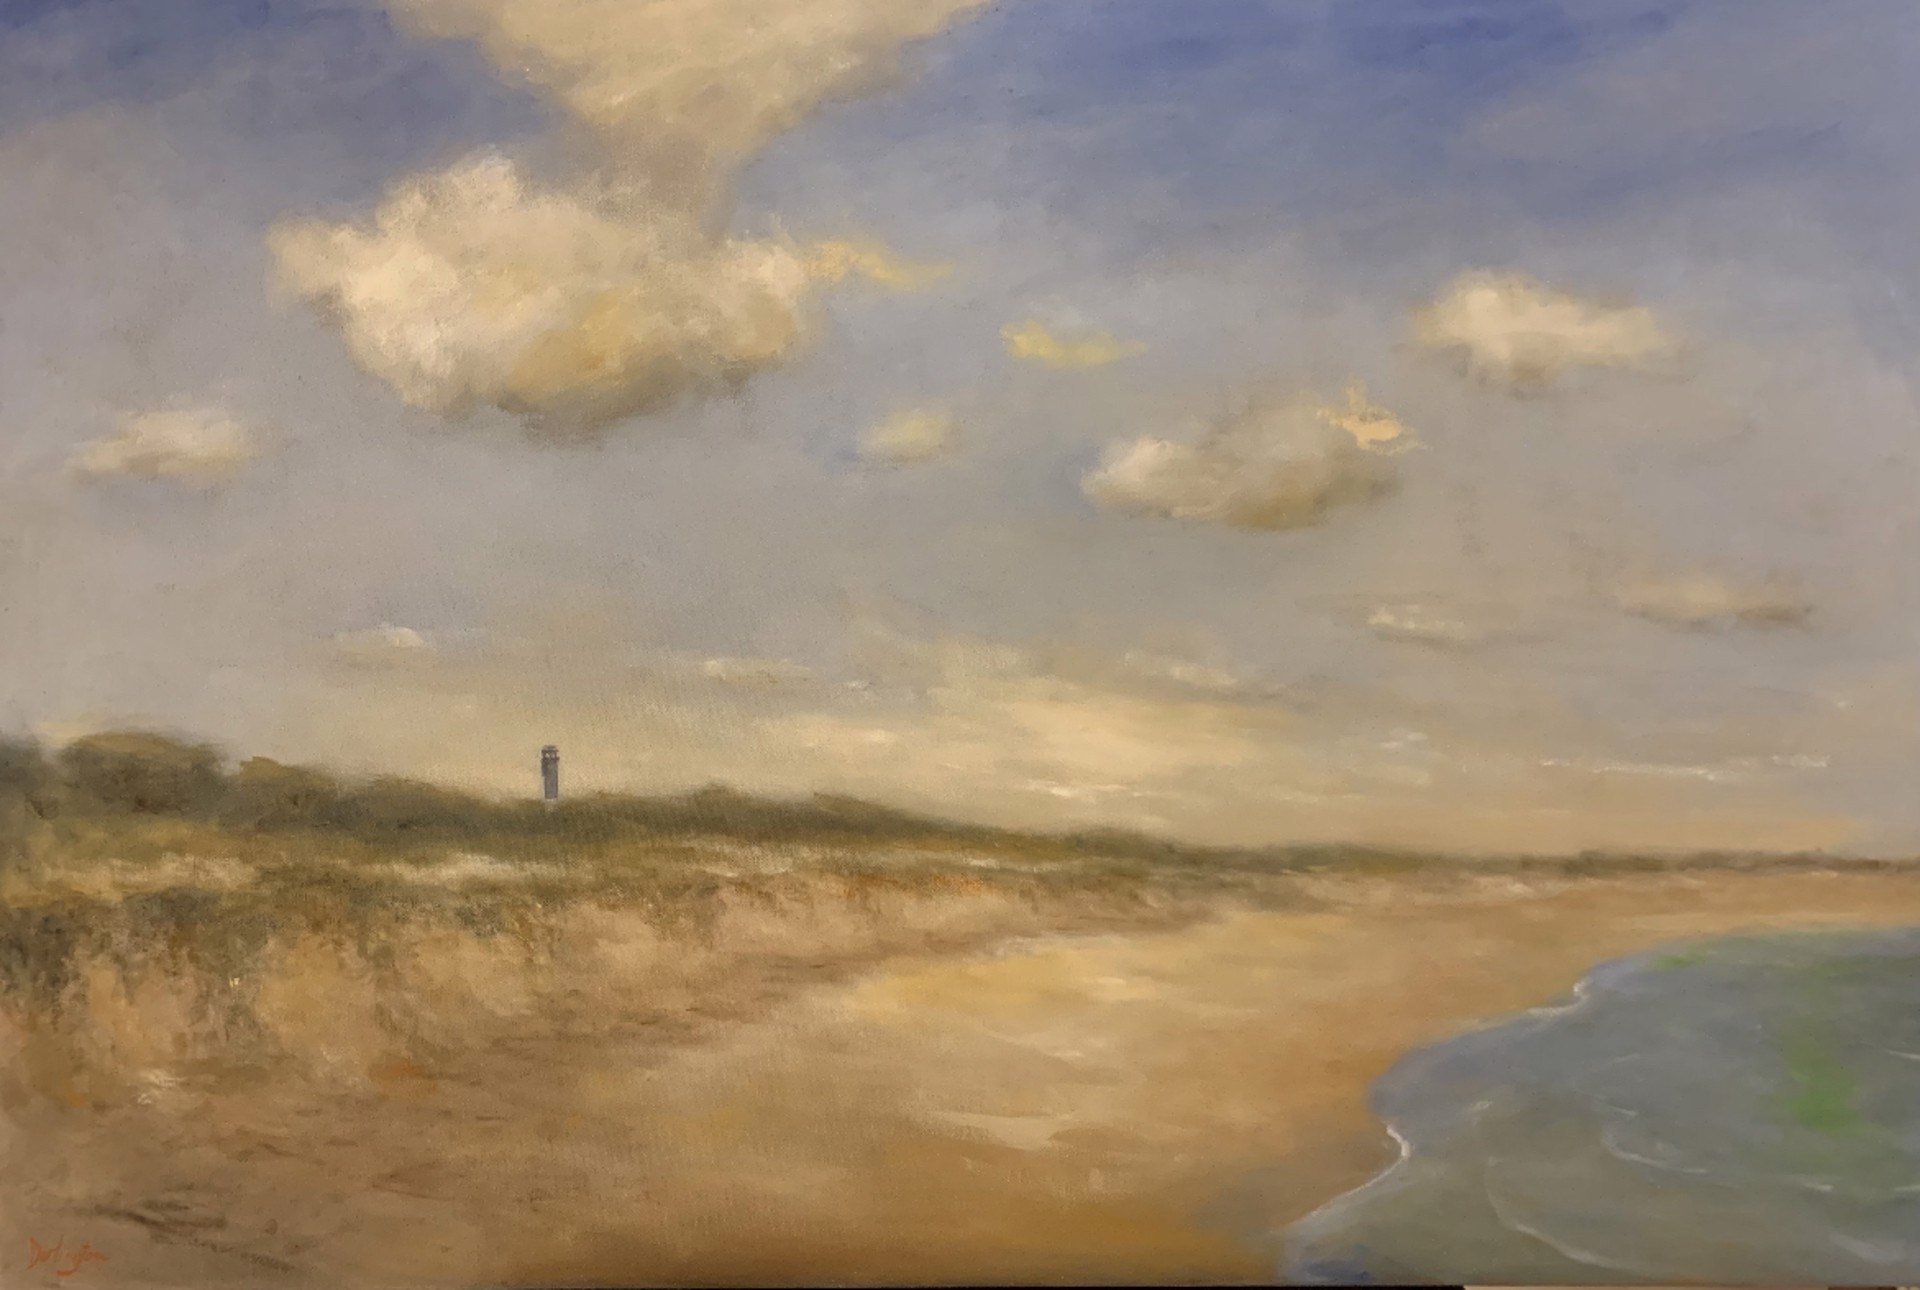 Lighthouse and Disappearing  Dunes by Jim Darlington